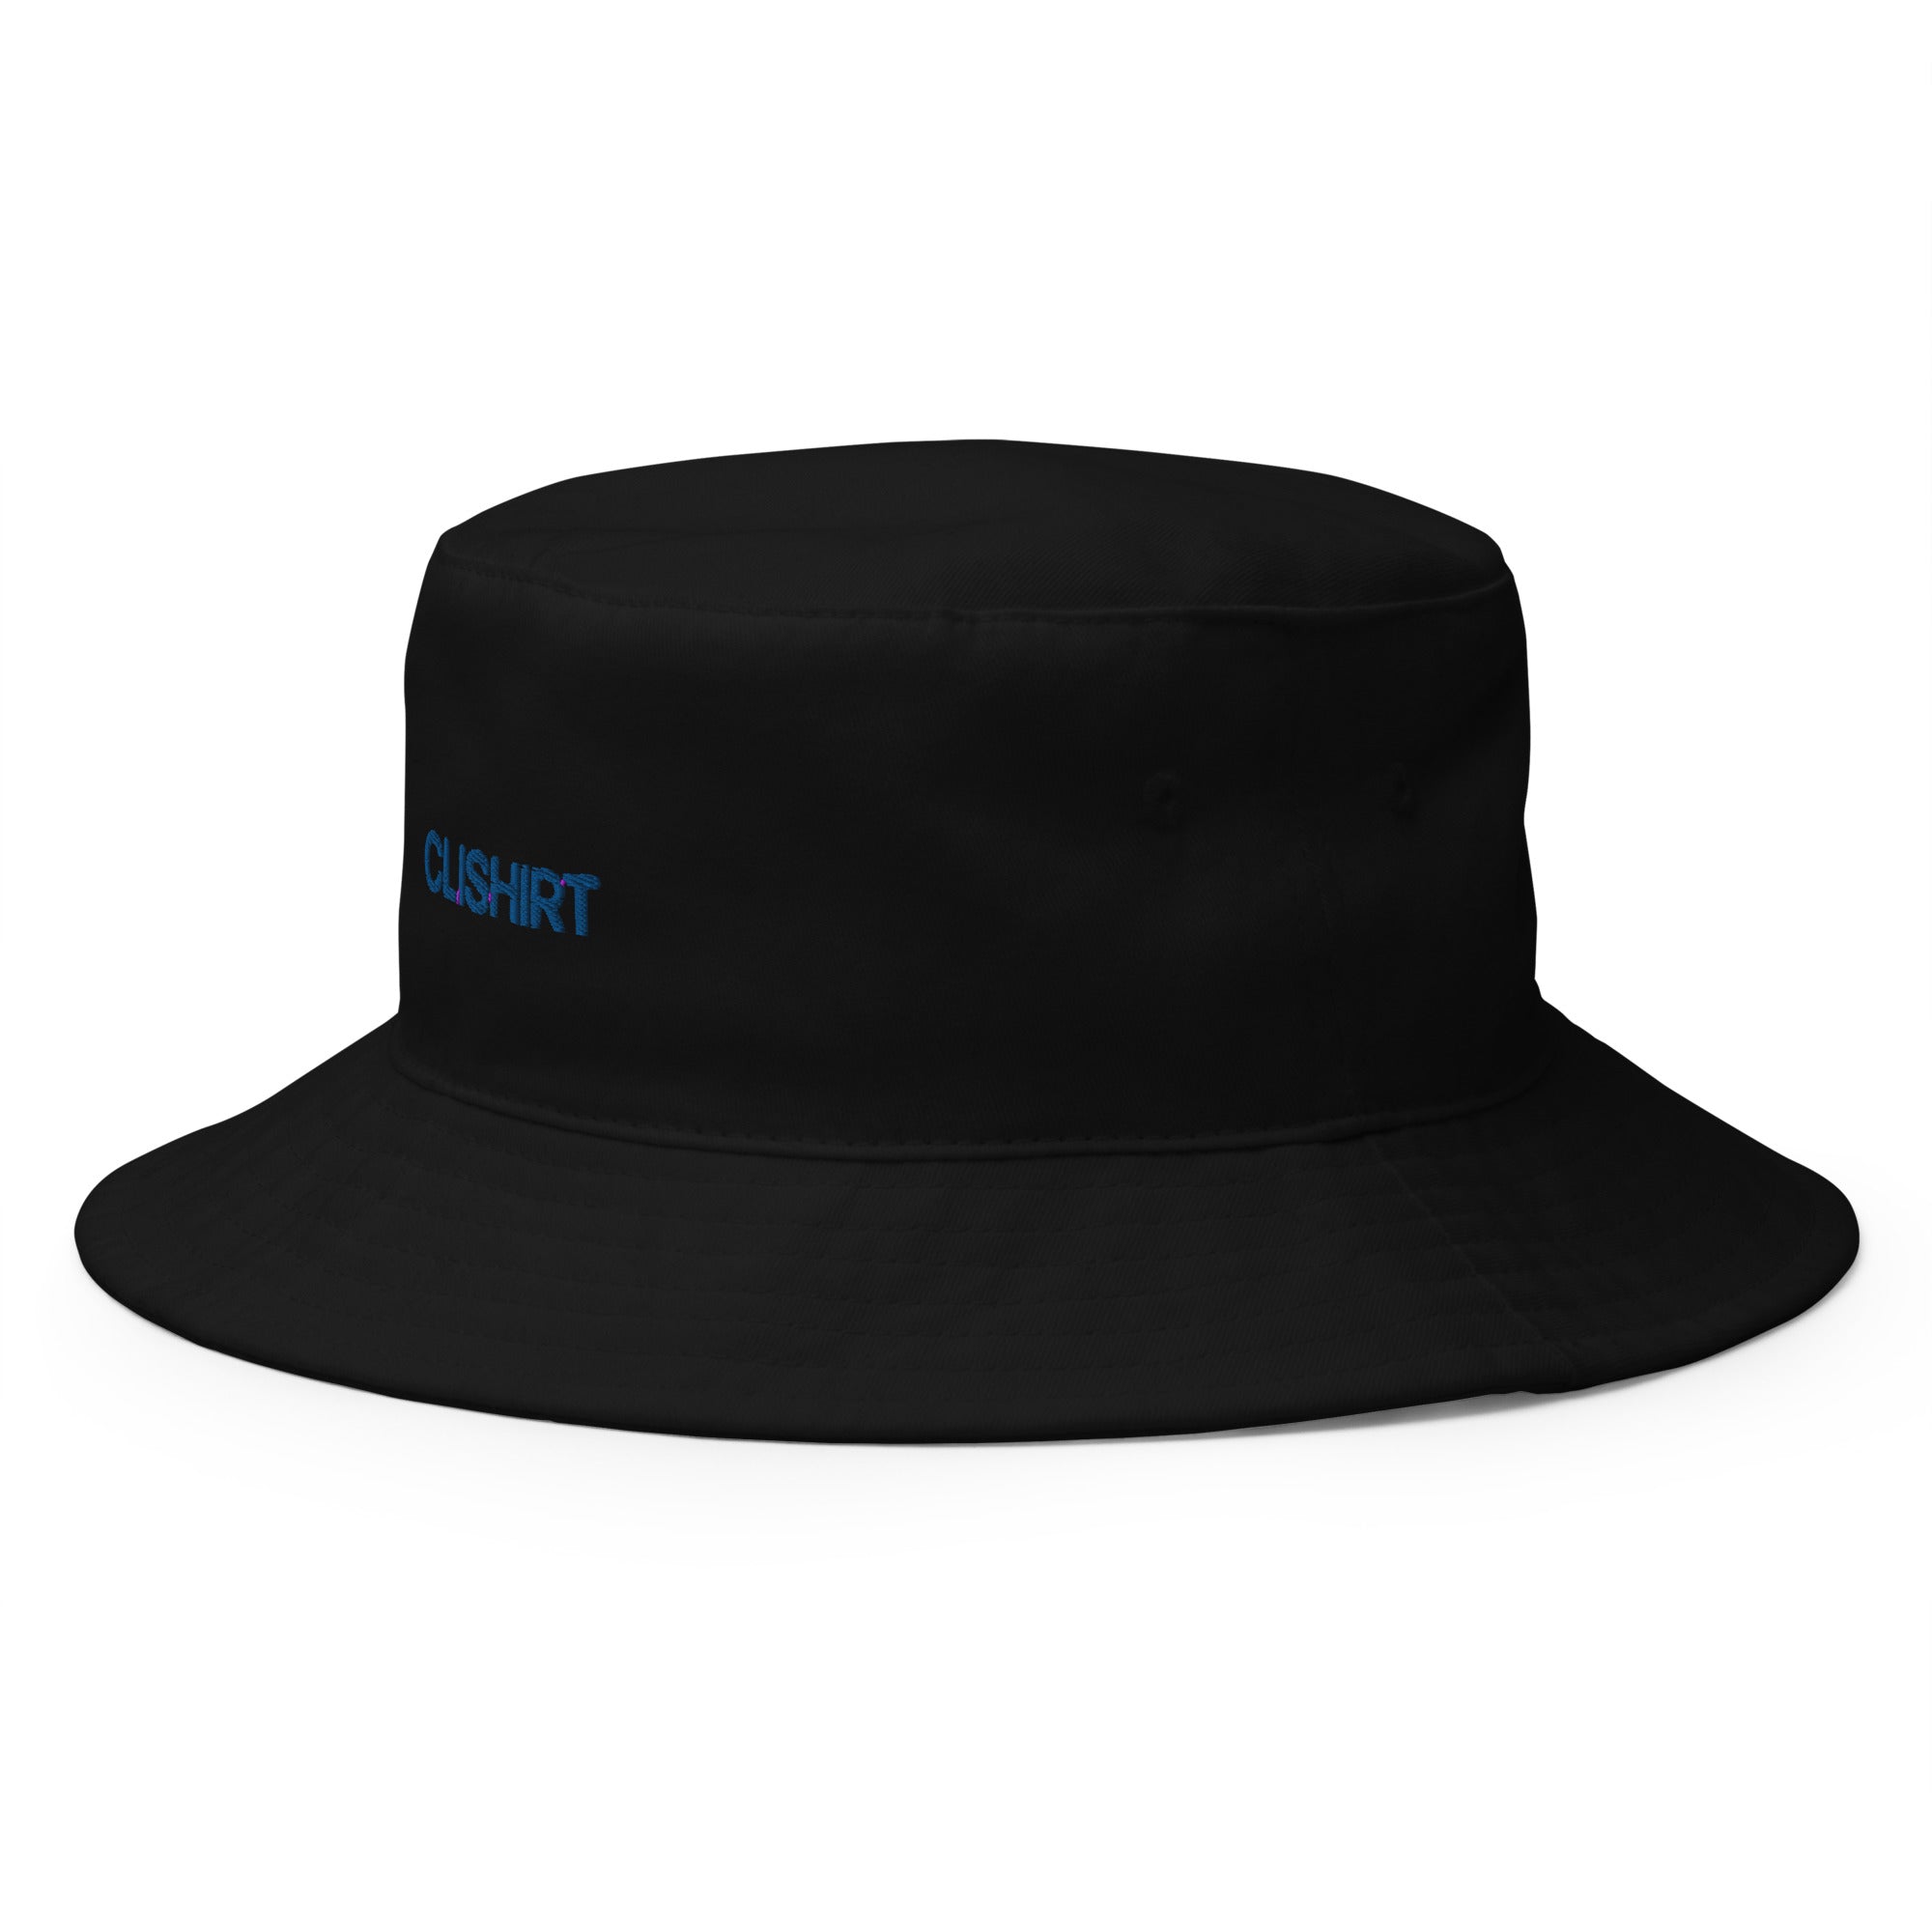 Clishirt© Embroidered Bucket Hat